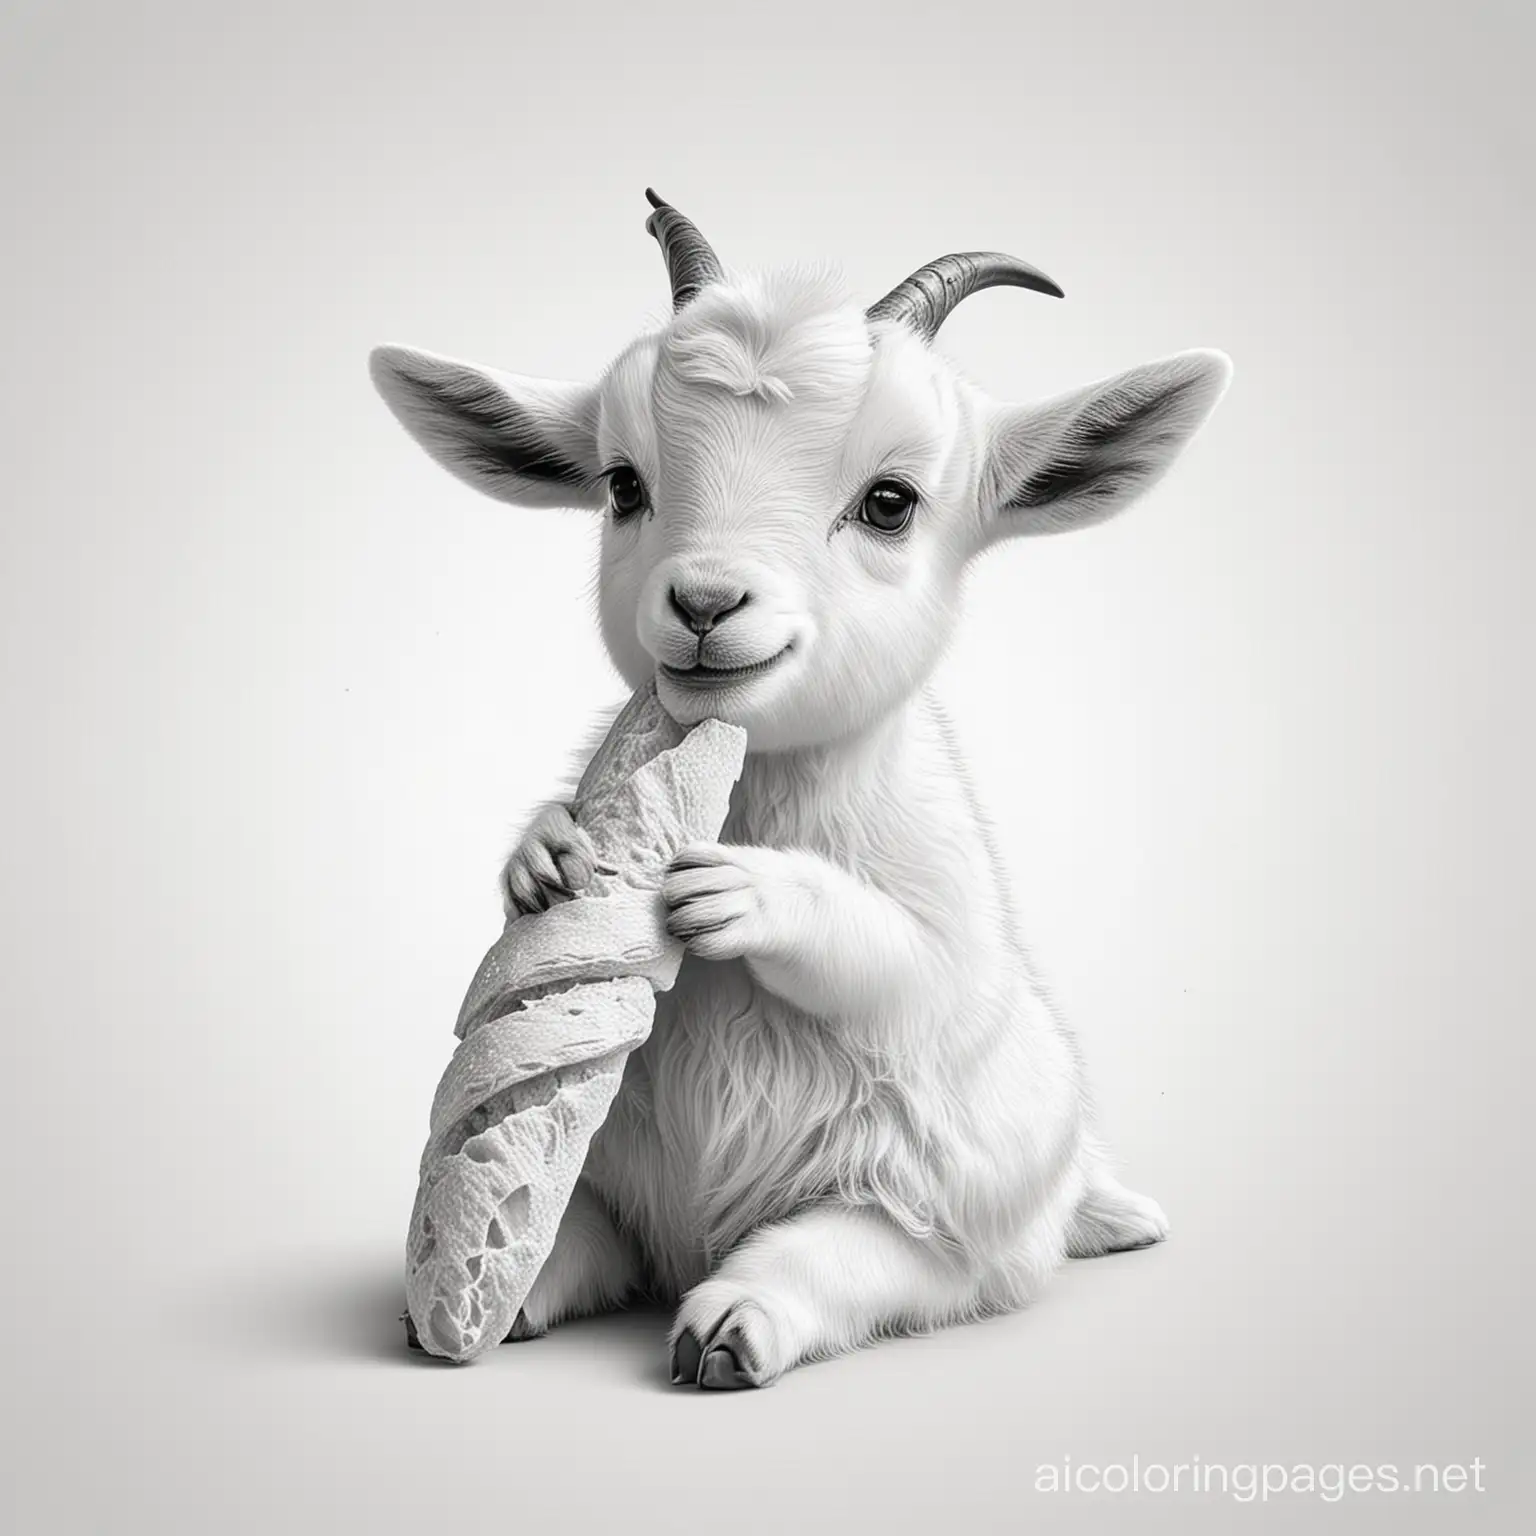 Cute-Baby-Goat-Enjoying-a-Baguette-Charming-Line-Art-Coloring-Page